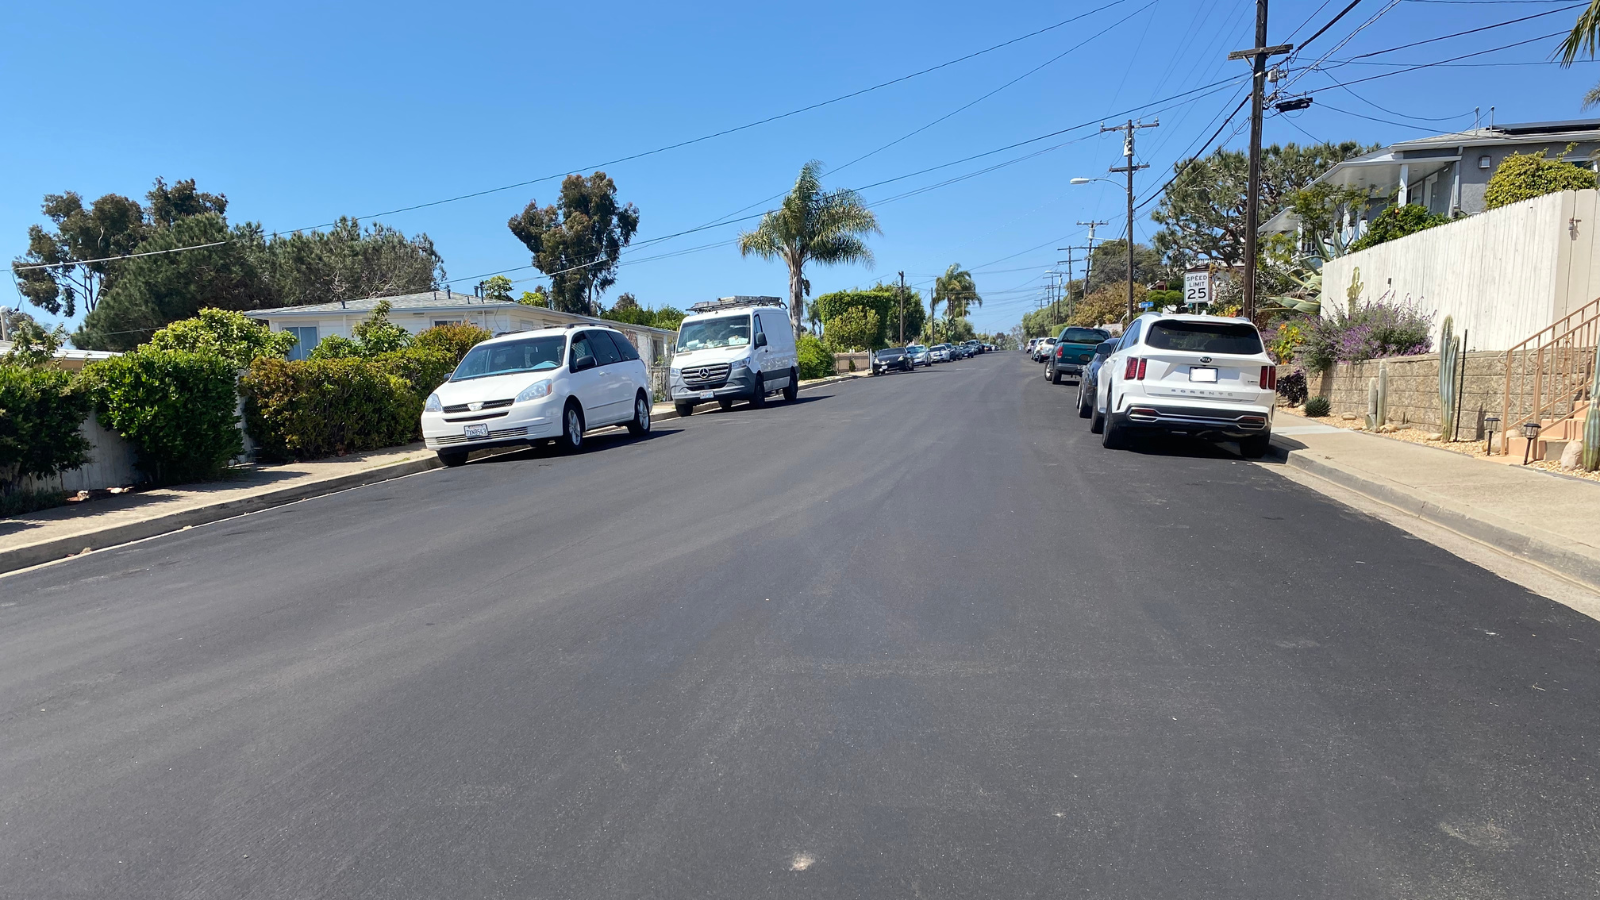 Street with slurry seal treatment